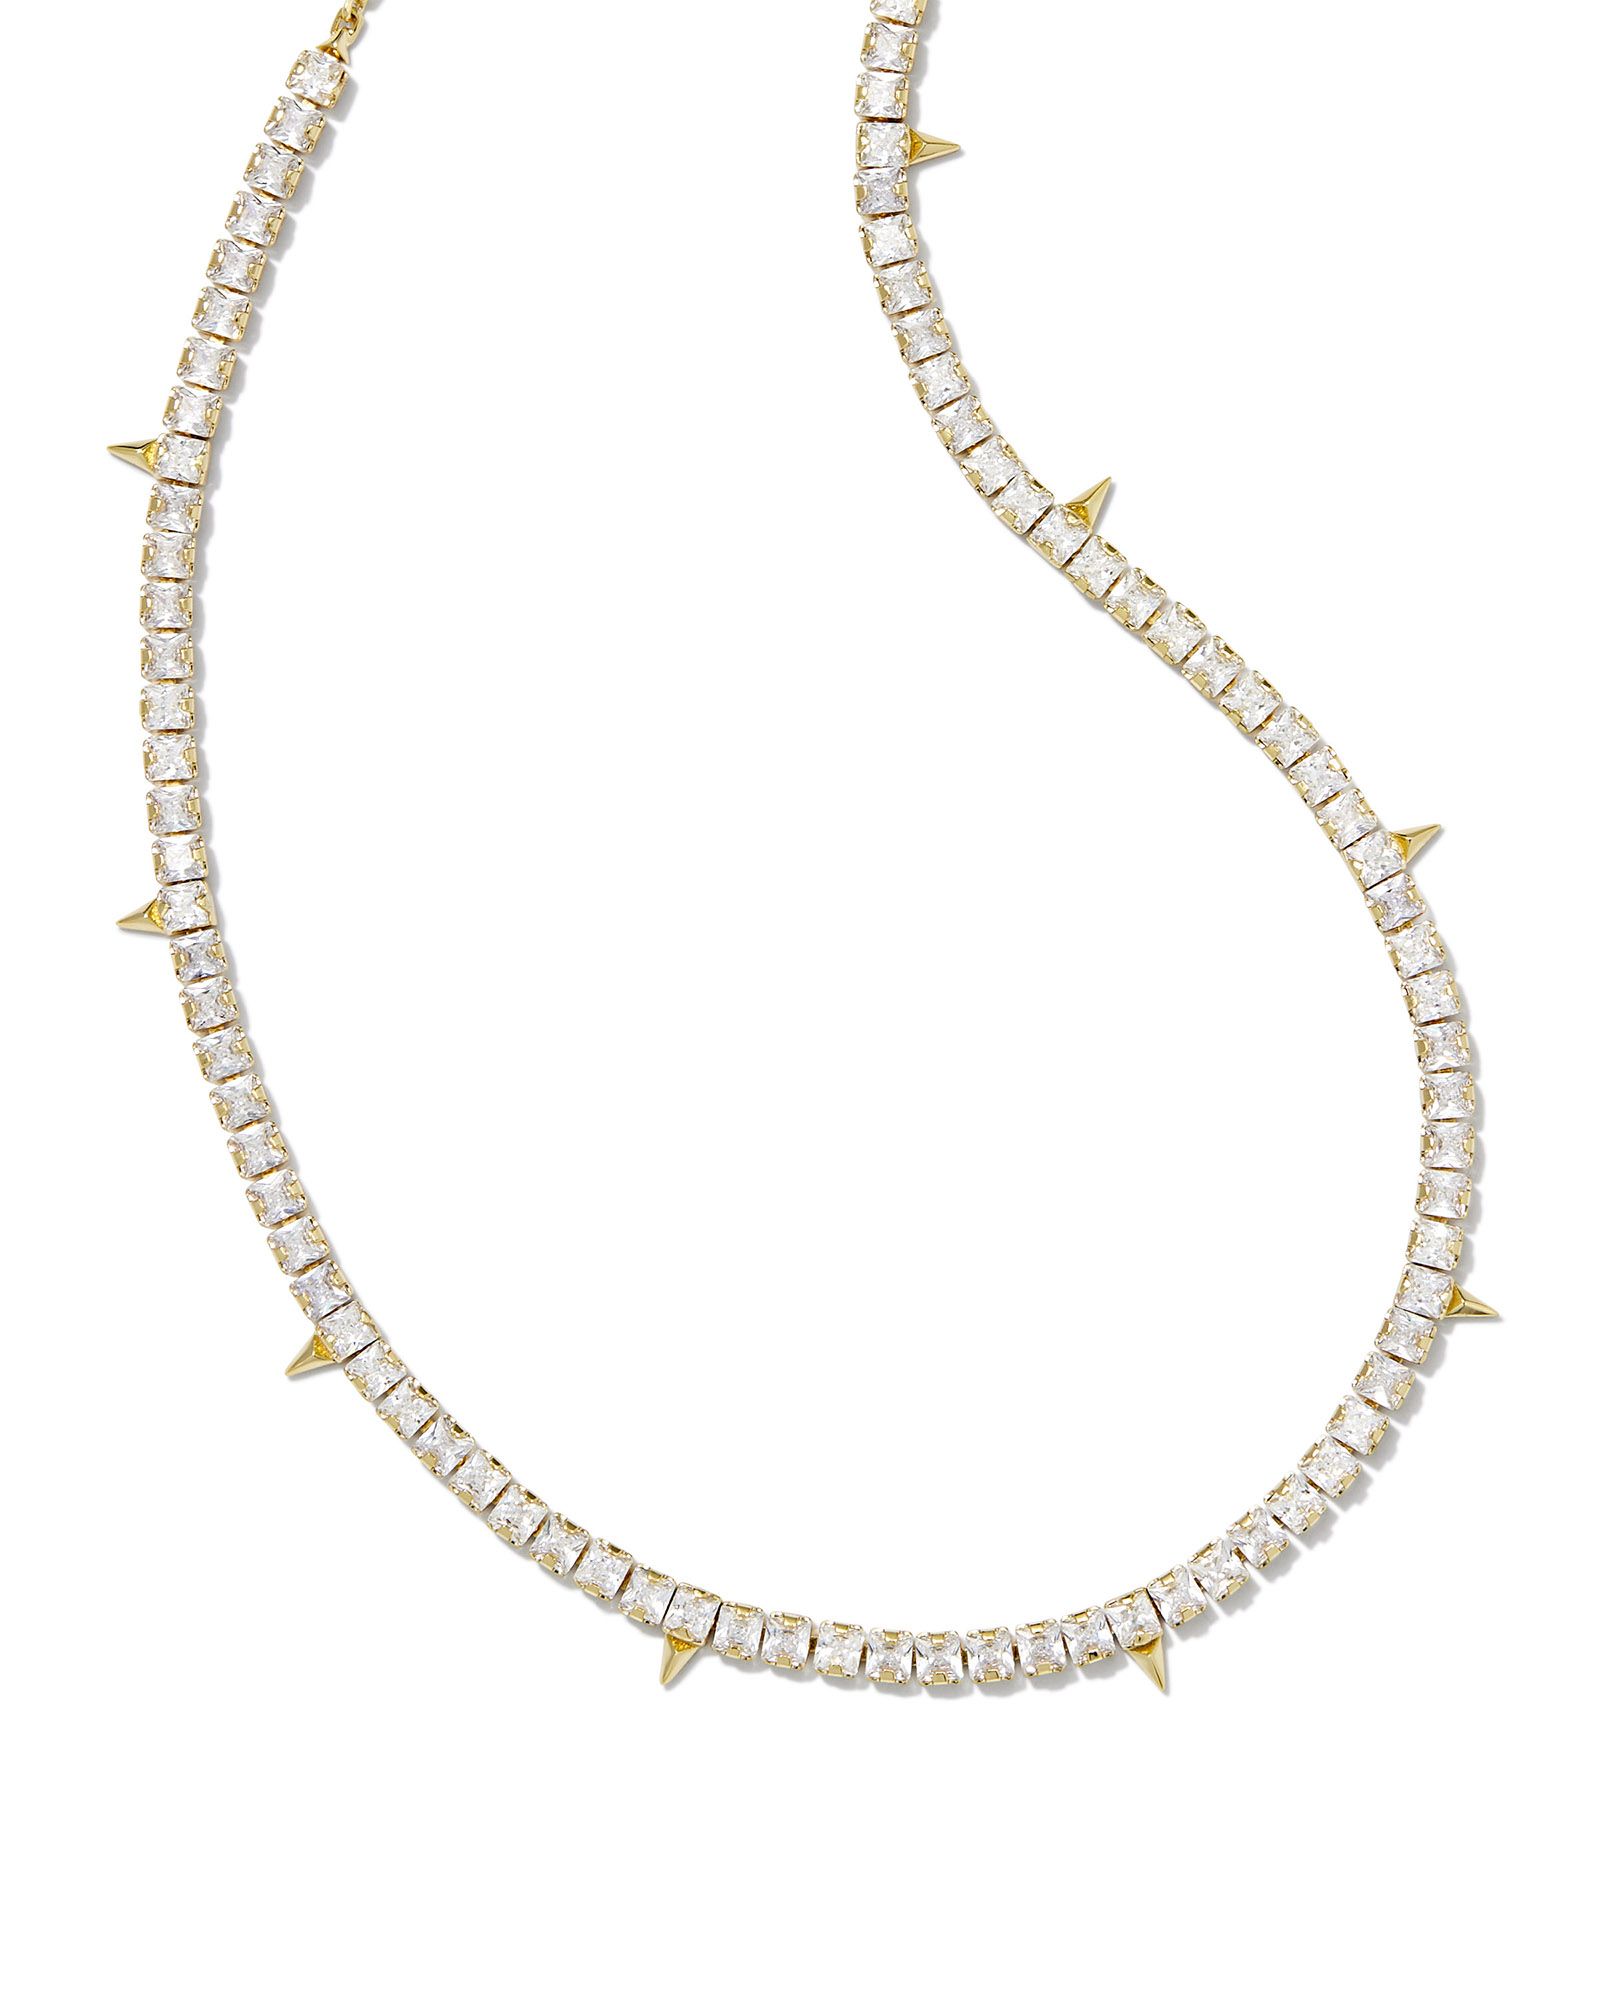 Jacqueline Gold Tennis Necklace in White Crystal | Kendra Scott